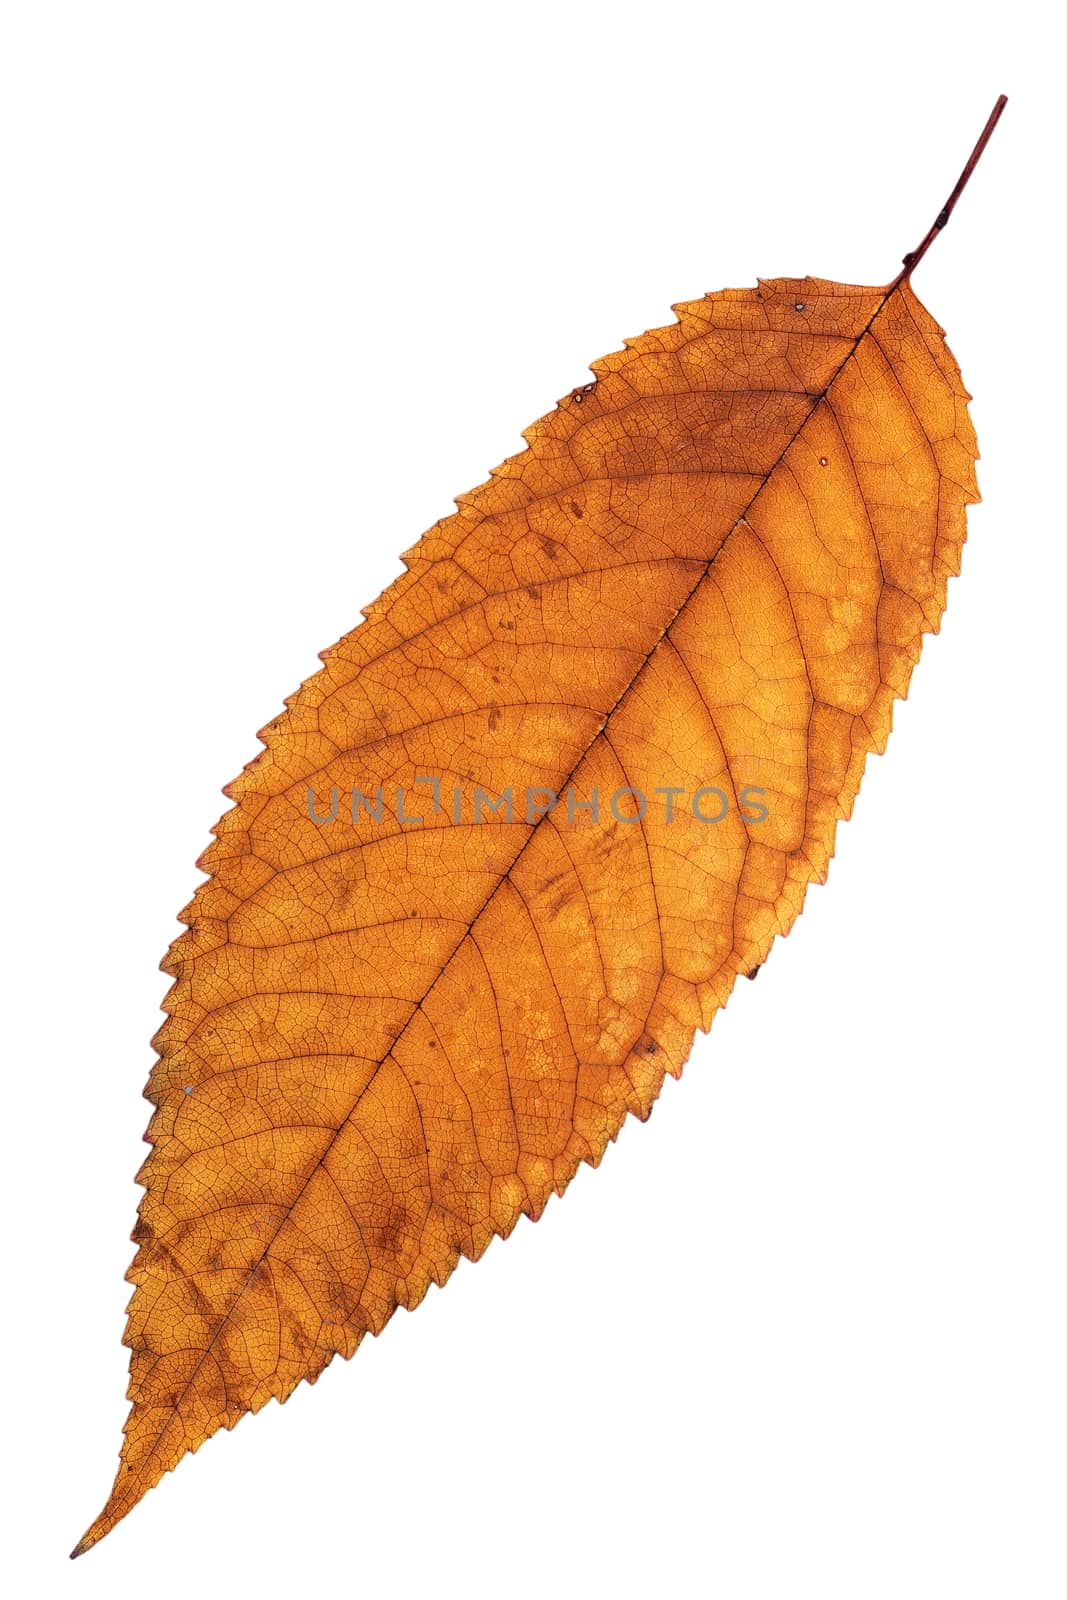 reddish isolated cherry leaf with colors of autumn season